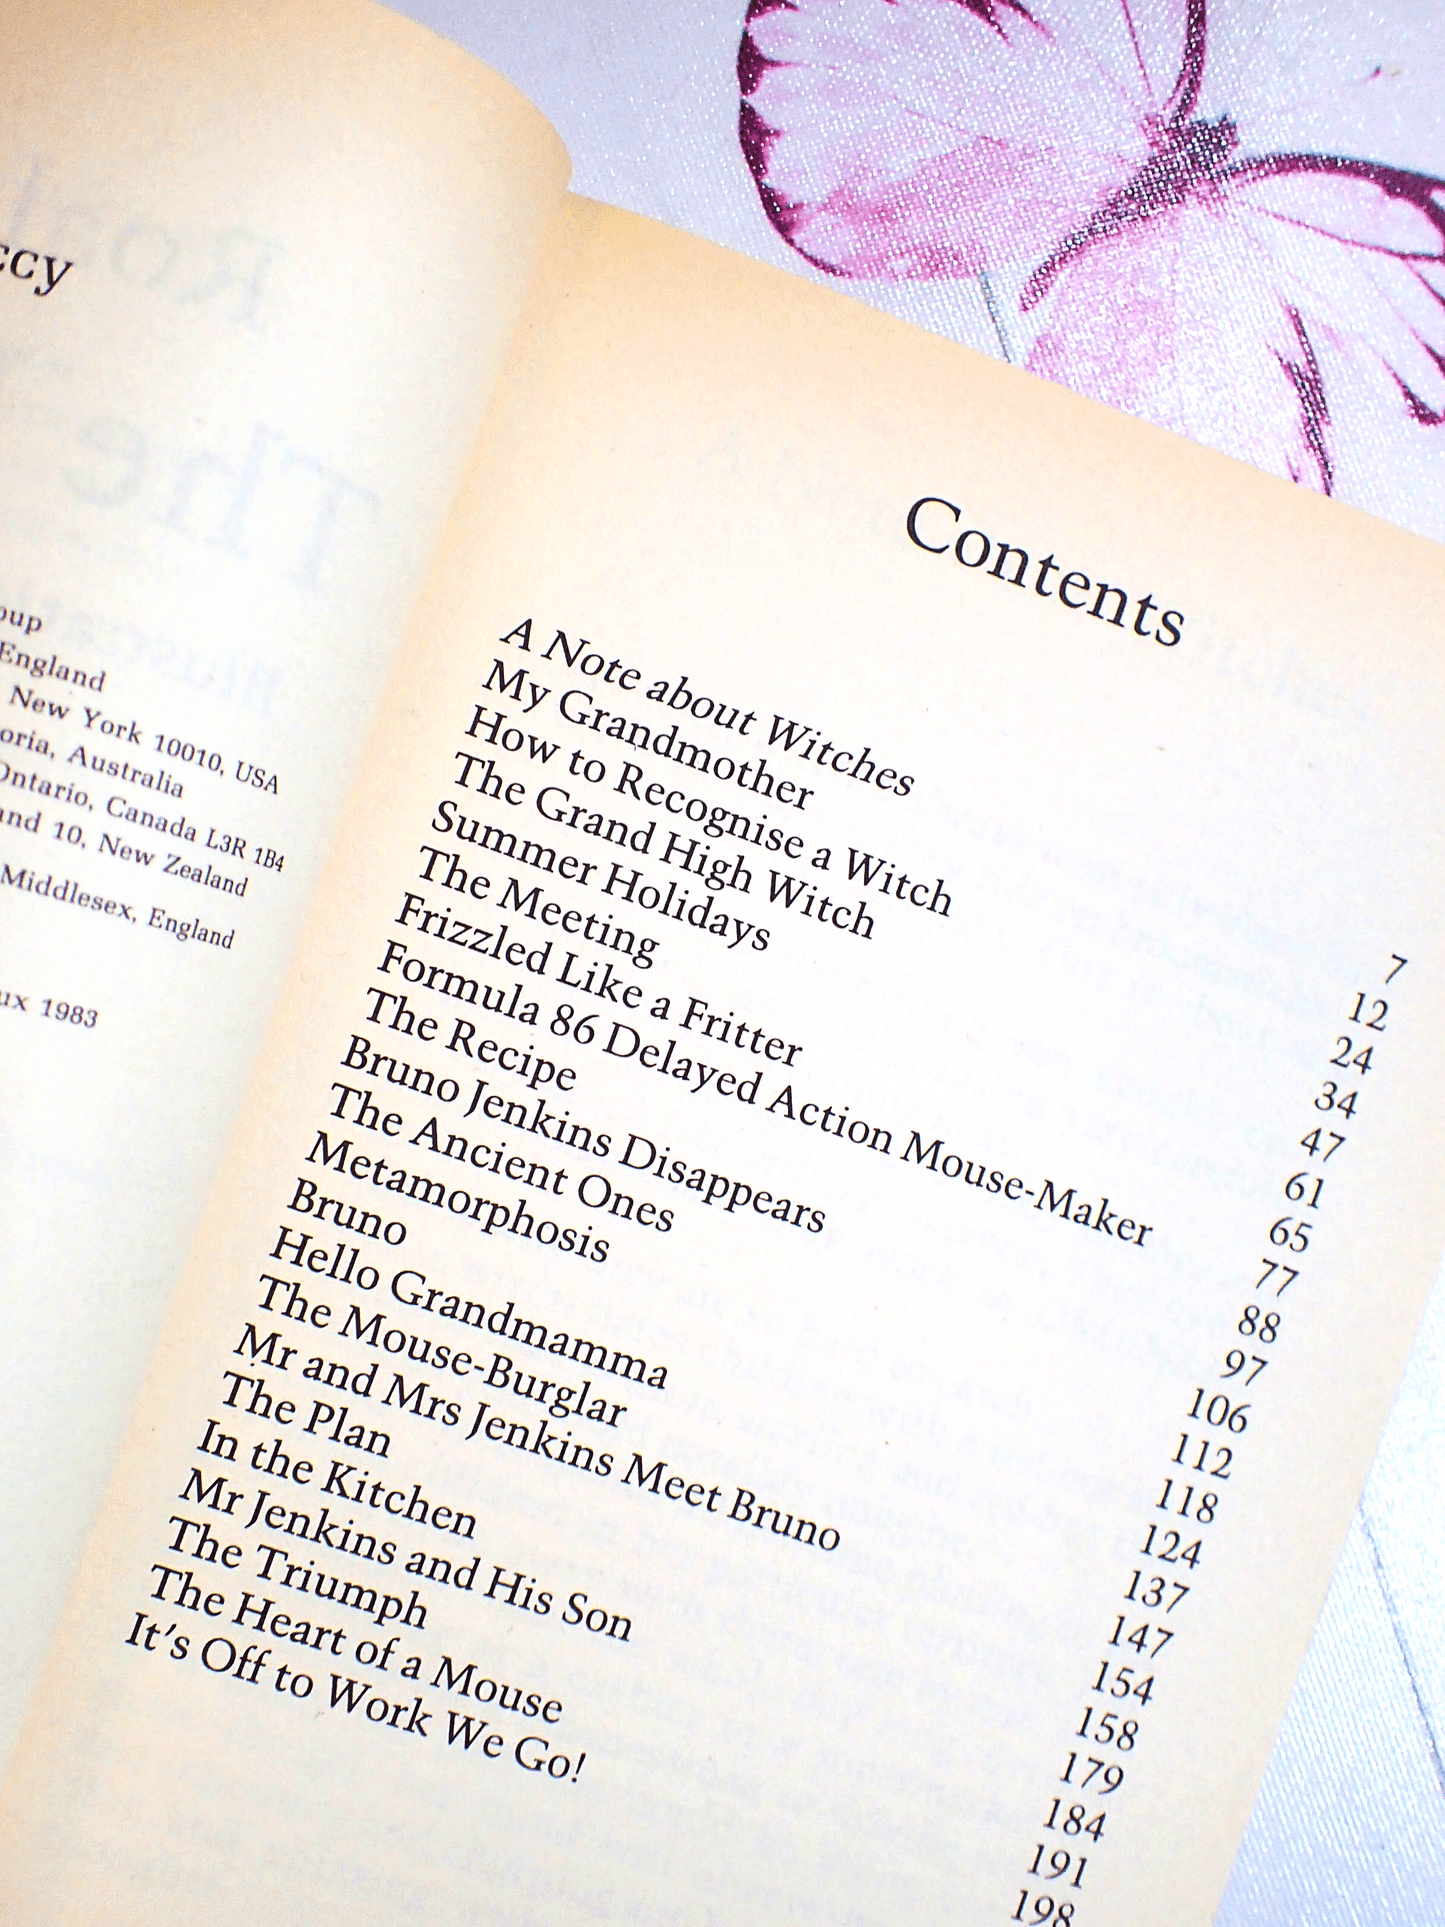 Page of Vintage Puffin Paperback Roald Dahl 'The Witches' showing 'Contents'.